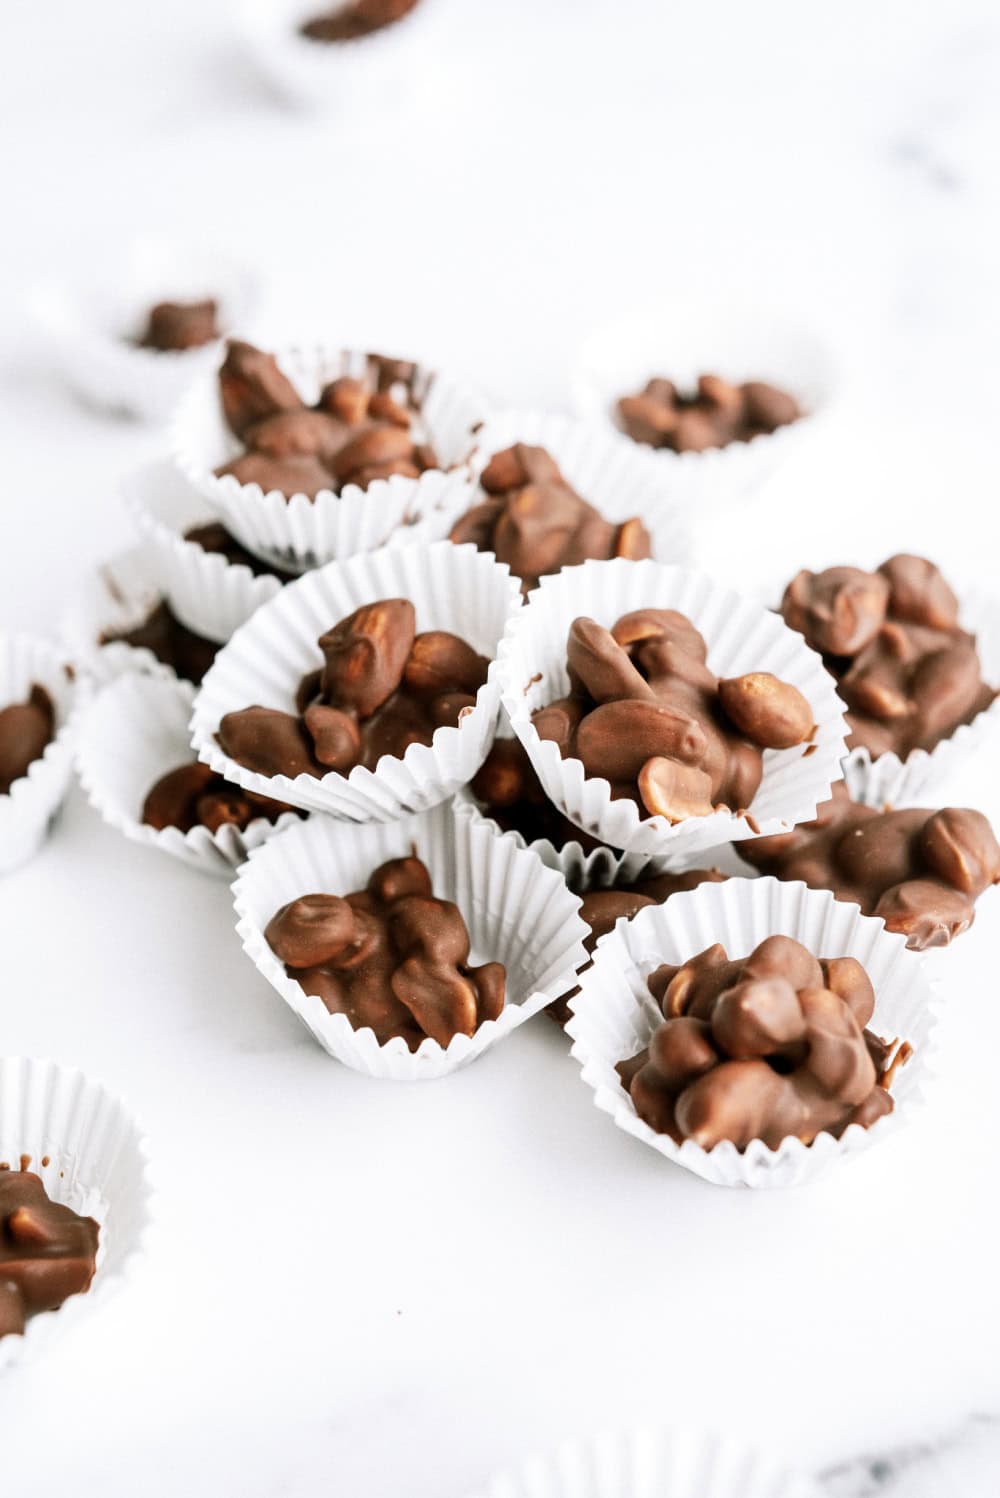 Keto Peanut Butter Nut Clusters  One of The BEST Keto Desserts You